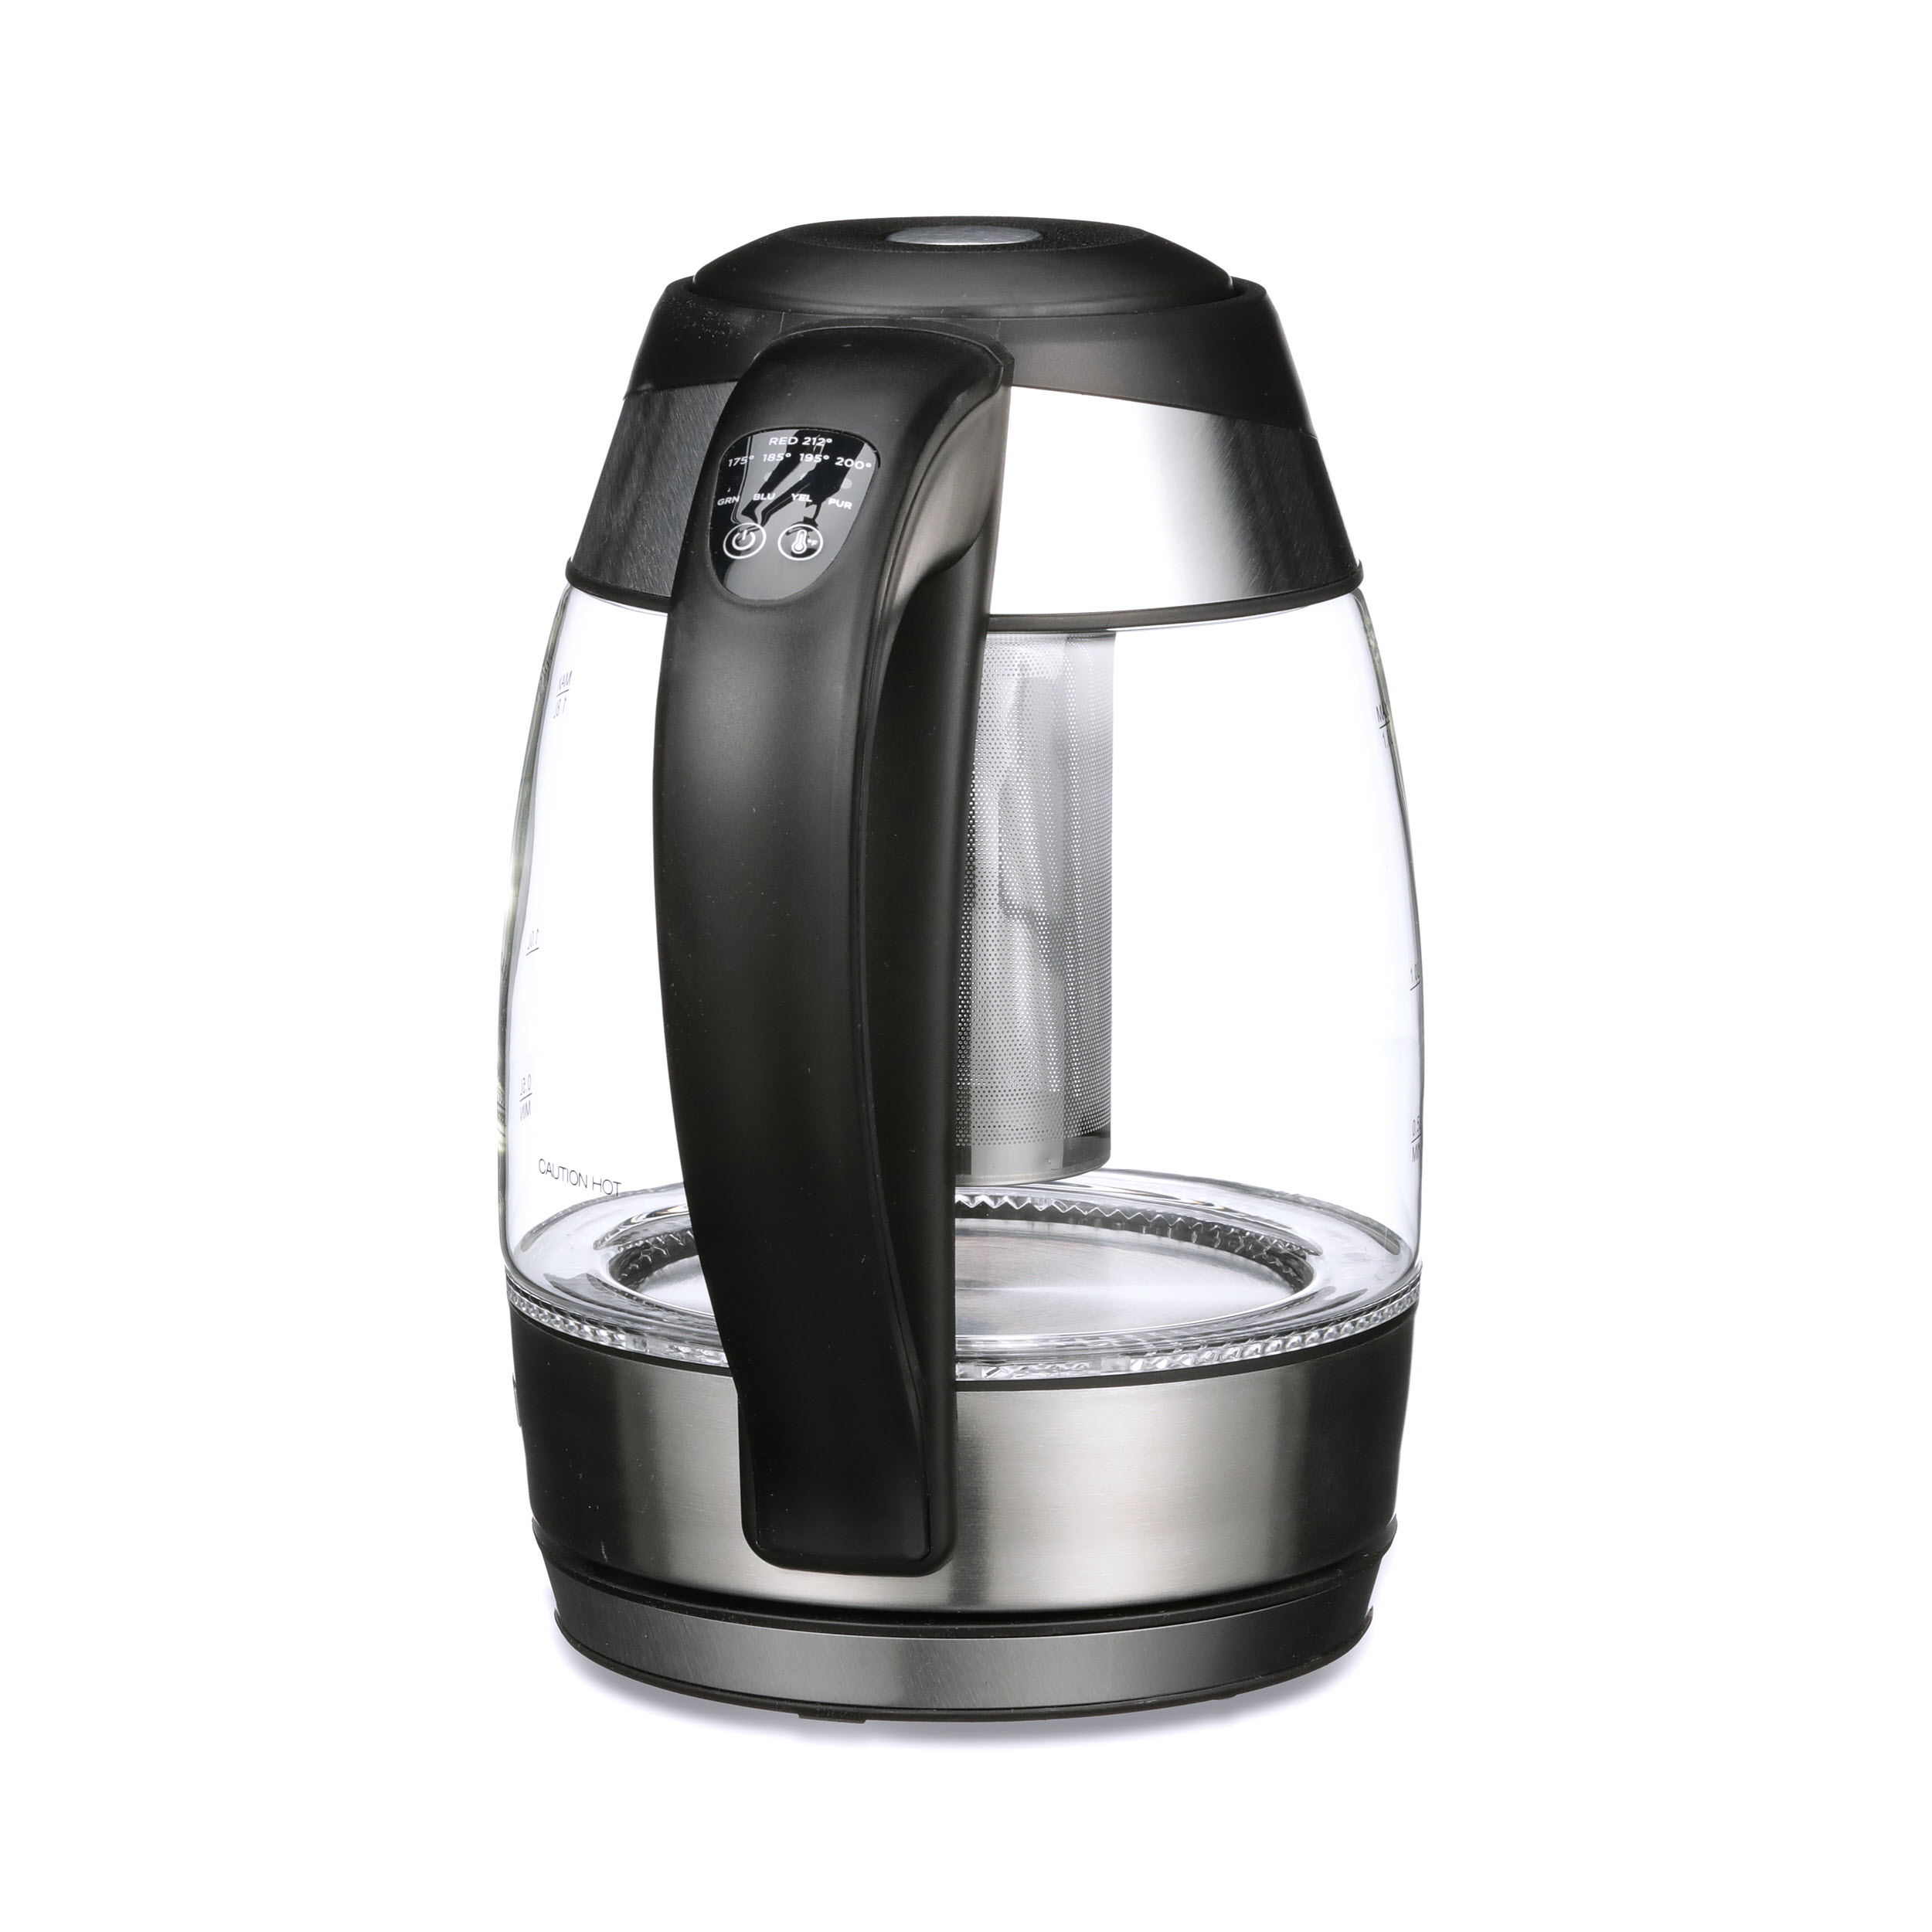 1.8-Liter Temperature Control Stainless-Steel Electric Kettle – Chefman